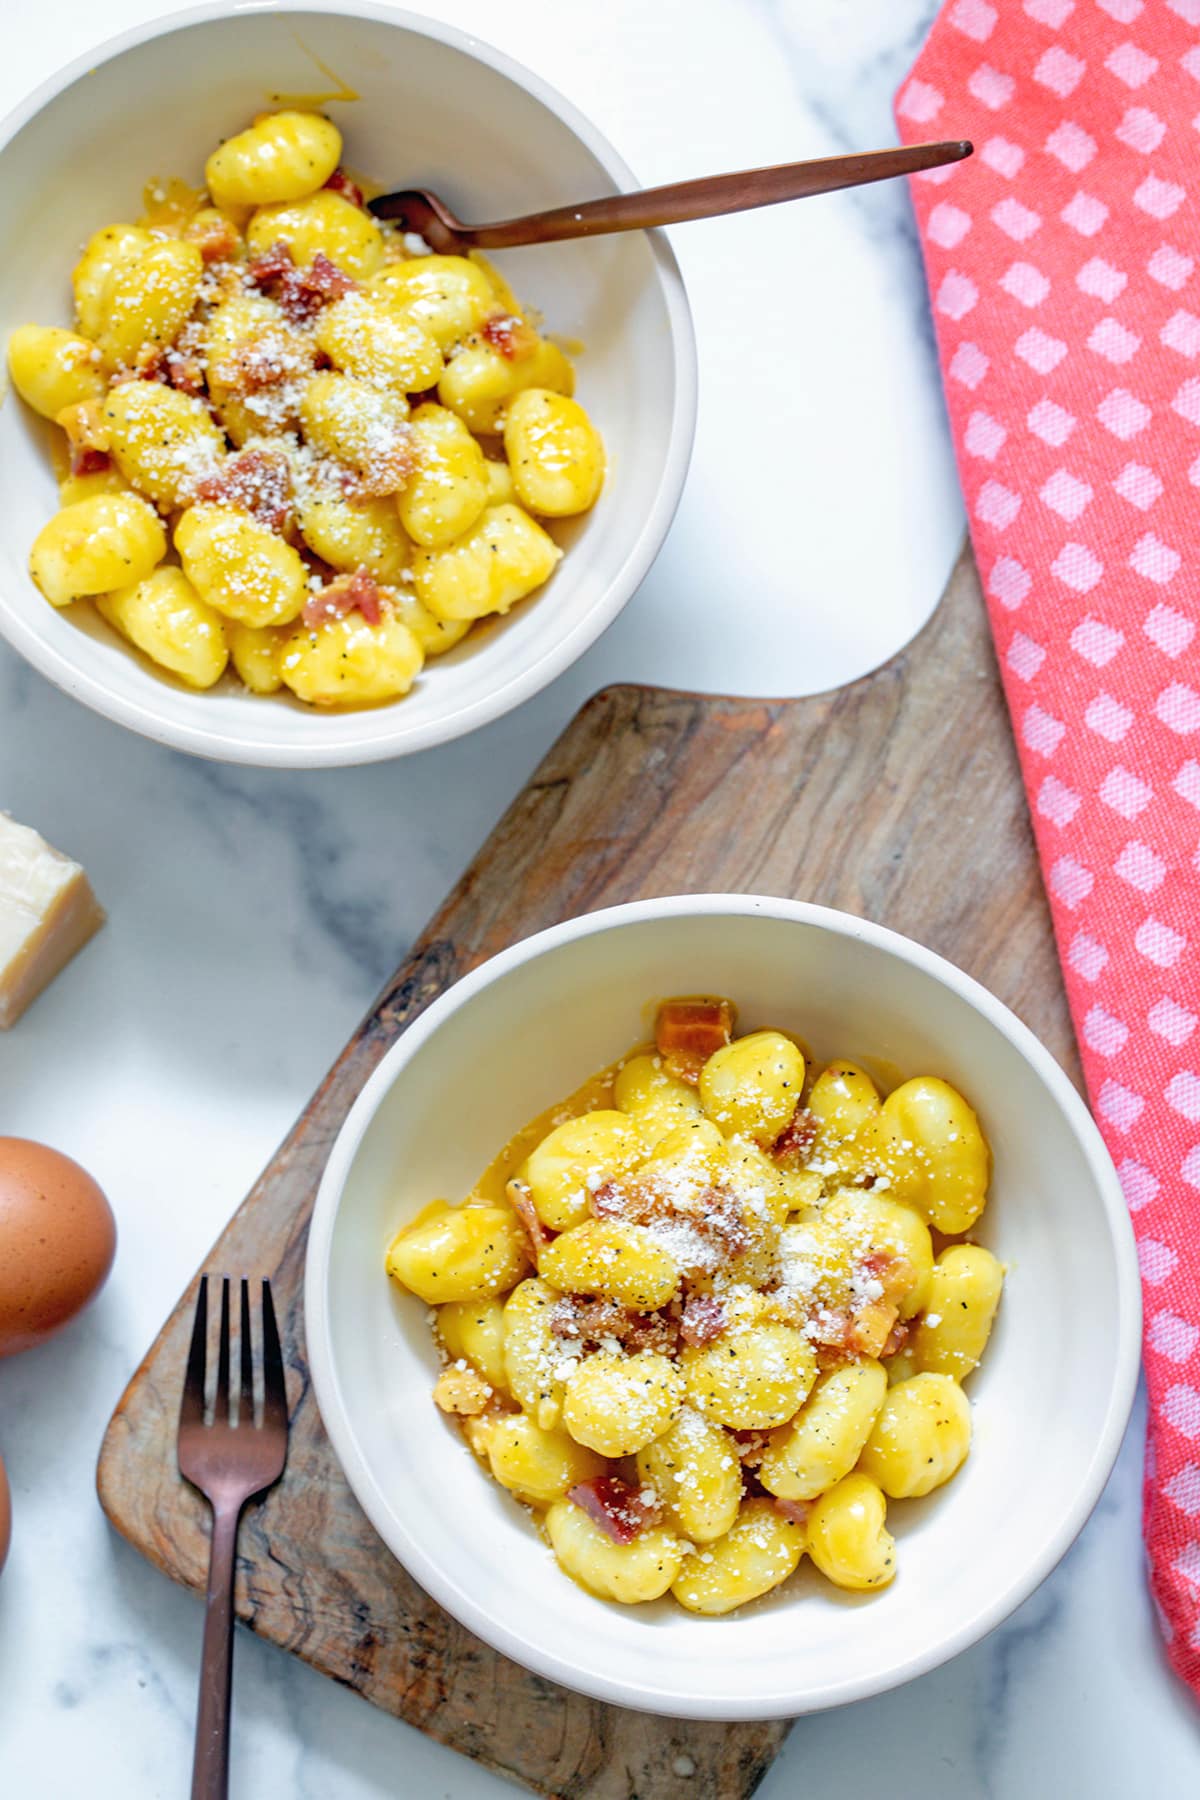 Overhead view of two bowls of gnocchi carbonara.